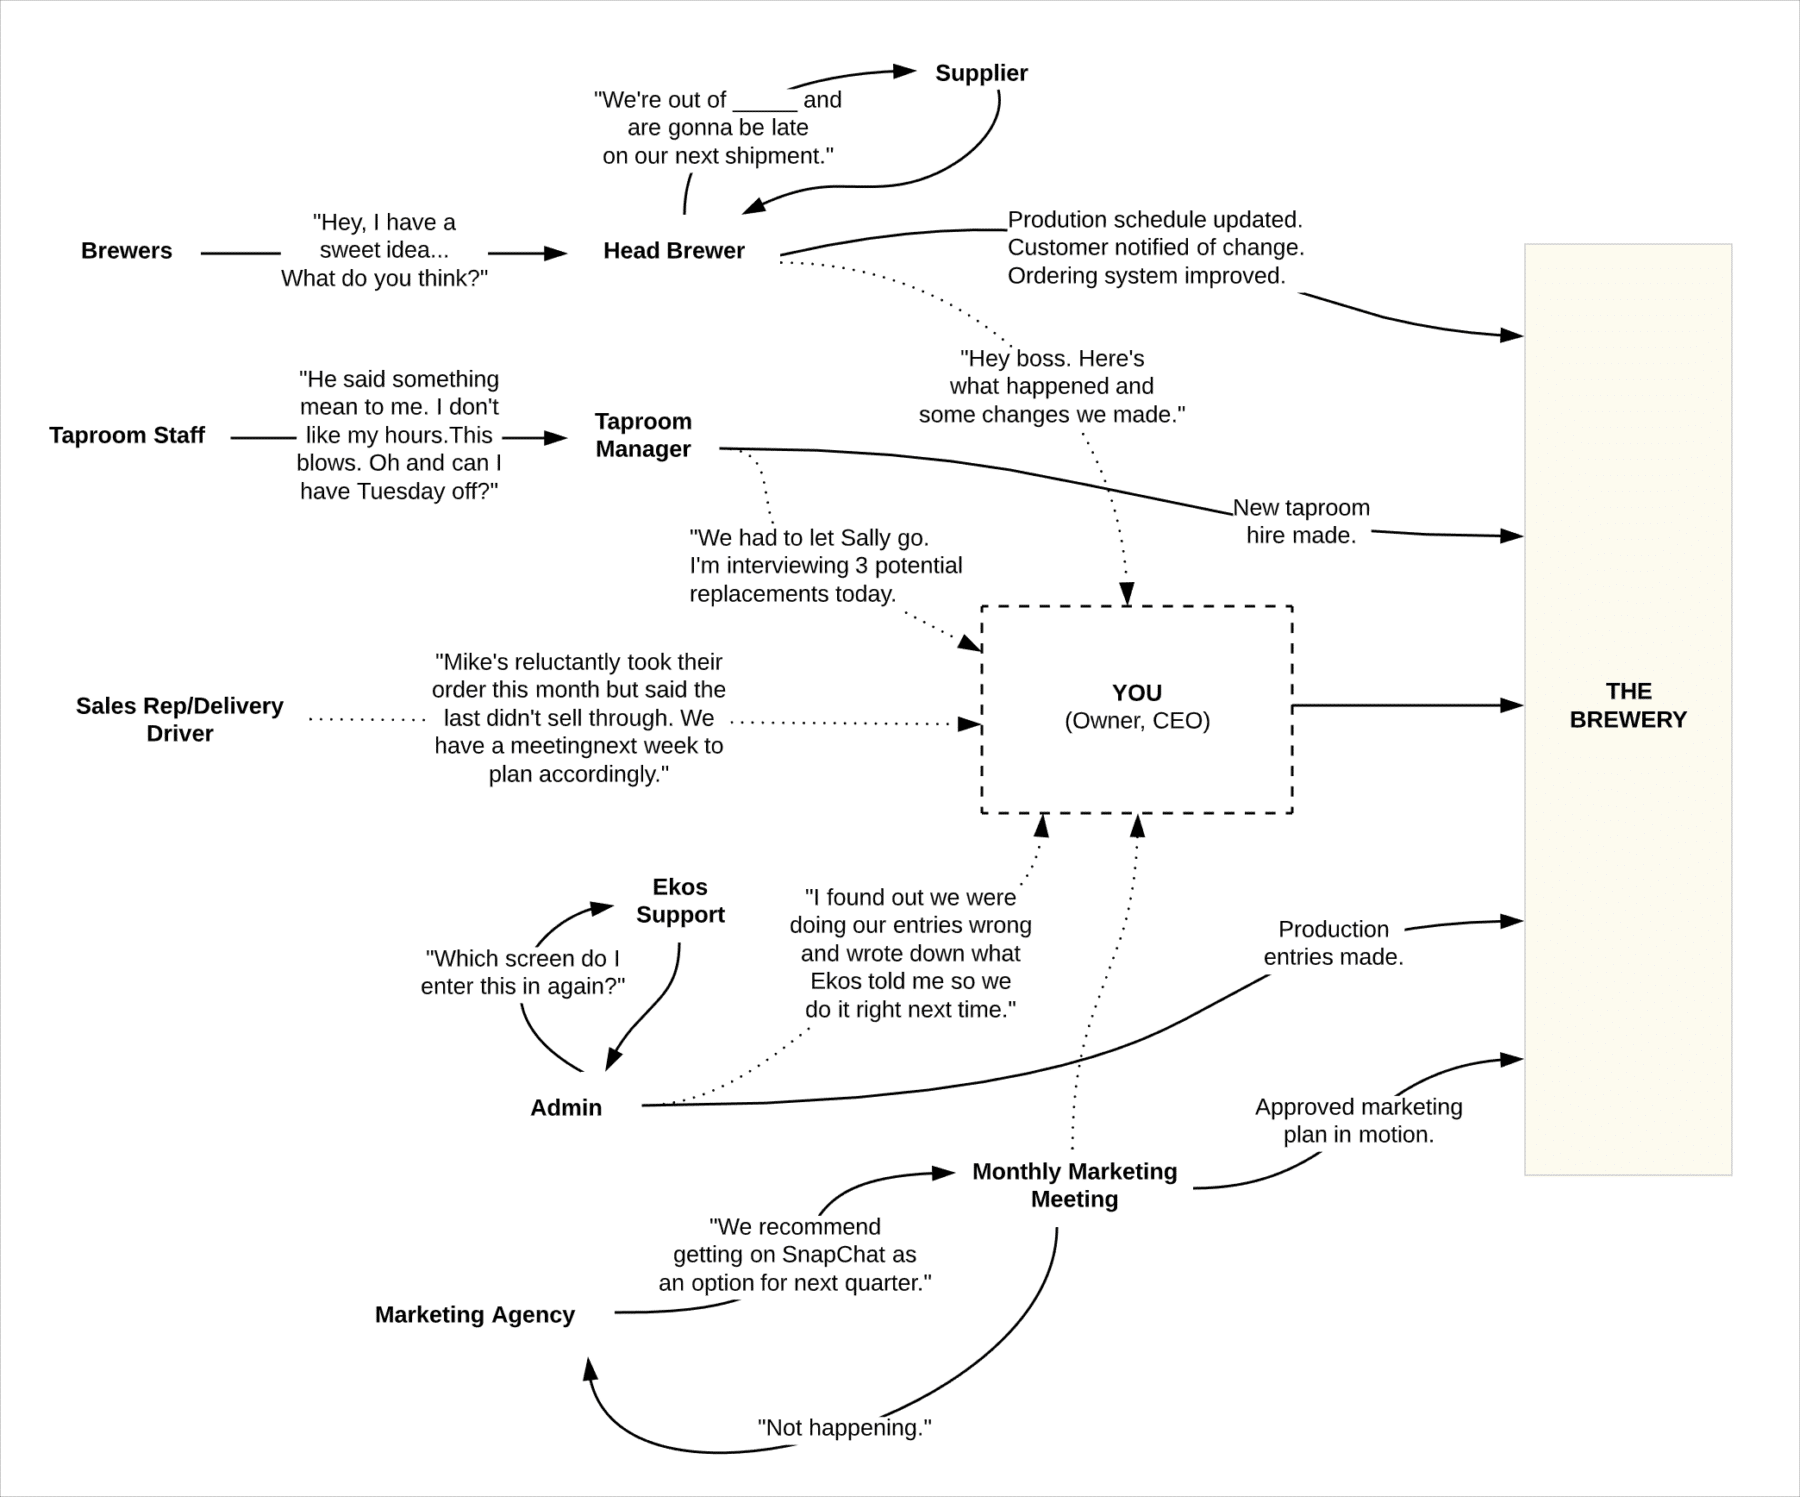 brewery owner with delegation flowchart